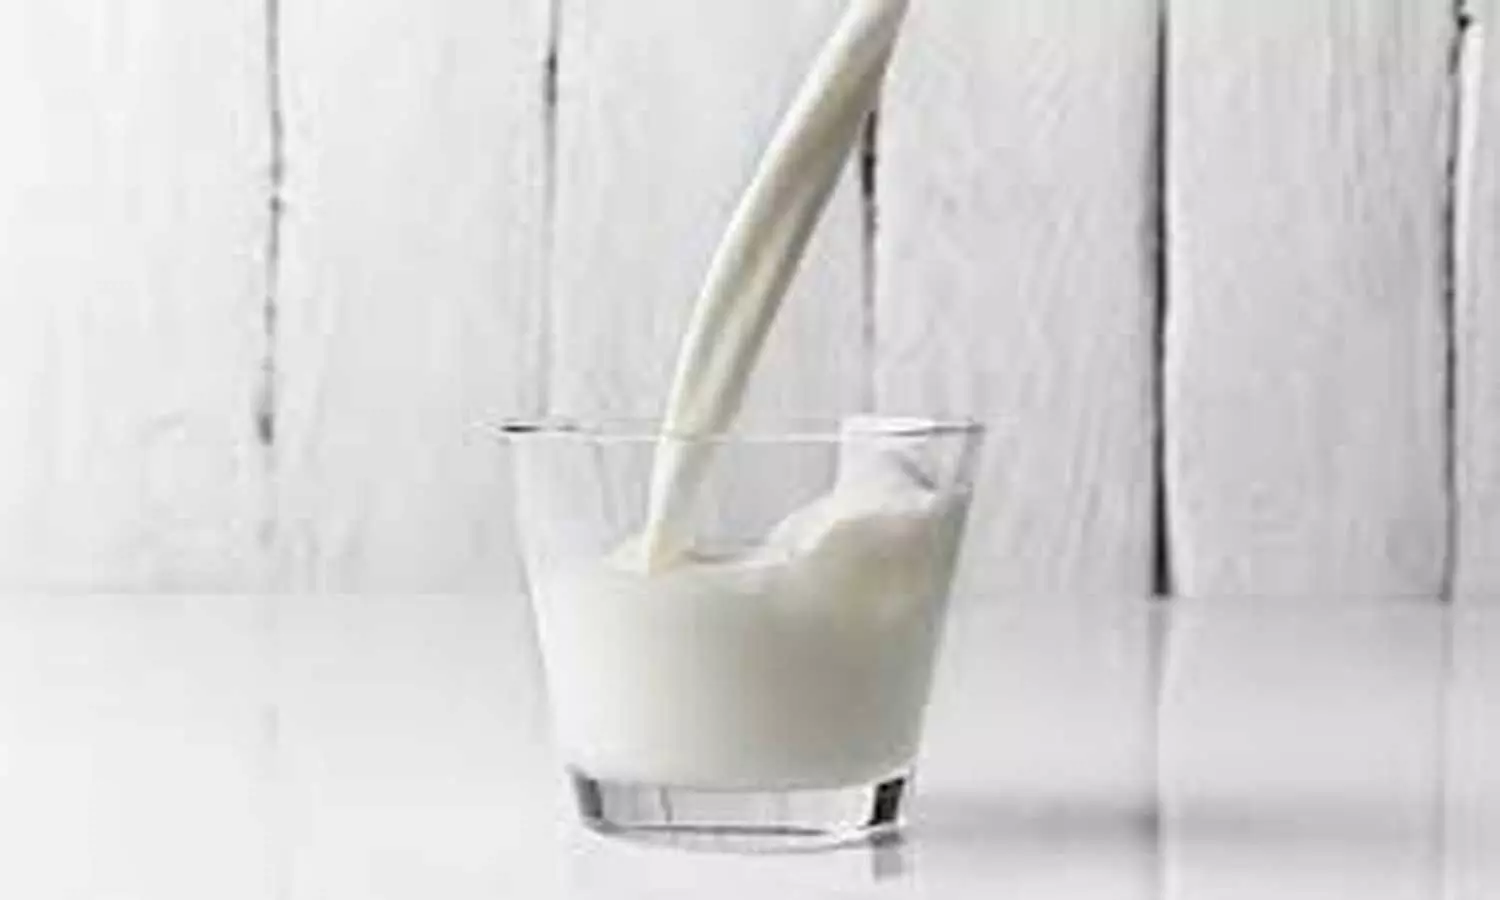 Fortified formula milks fail to improve academic performance of children later